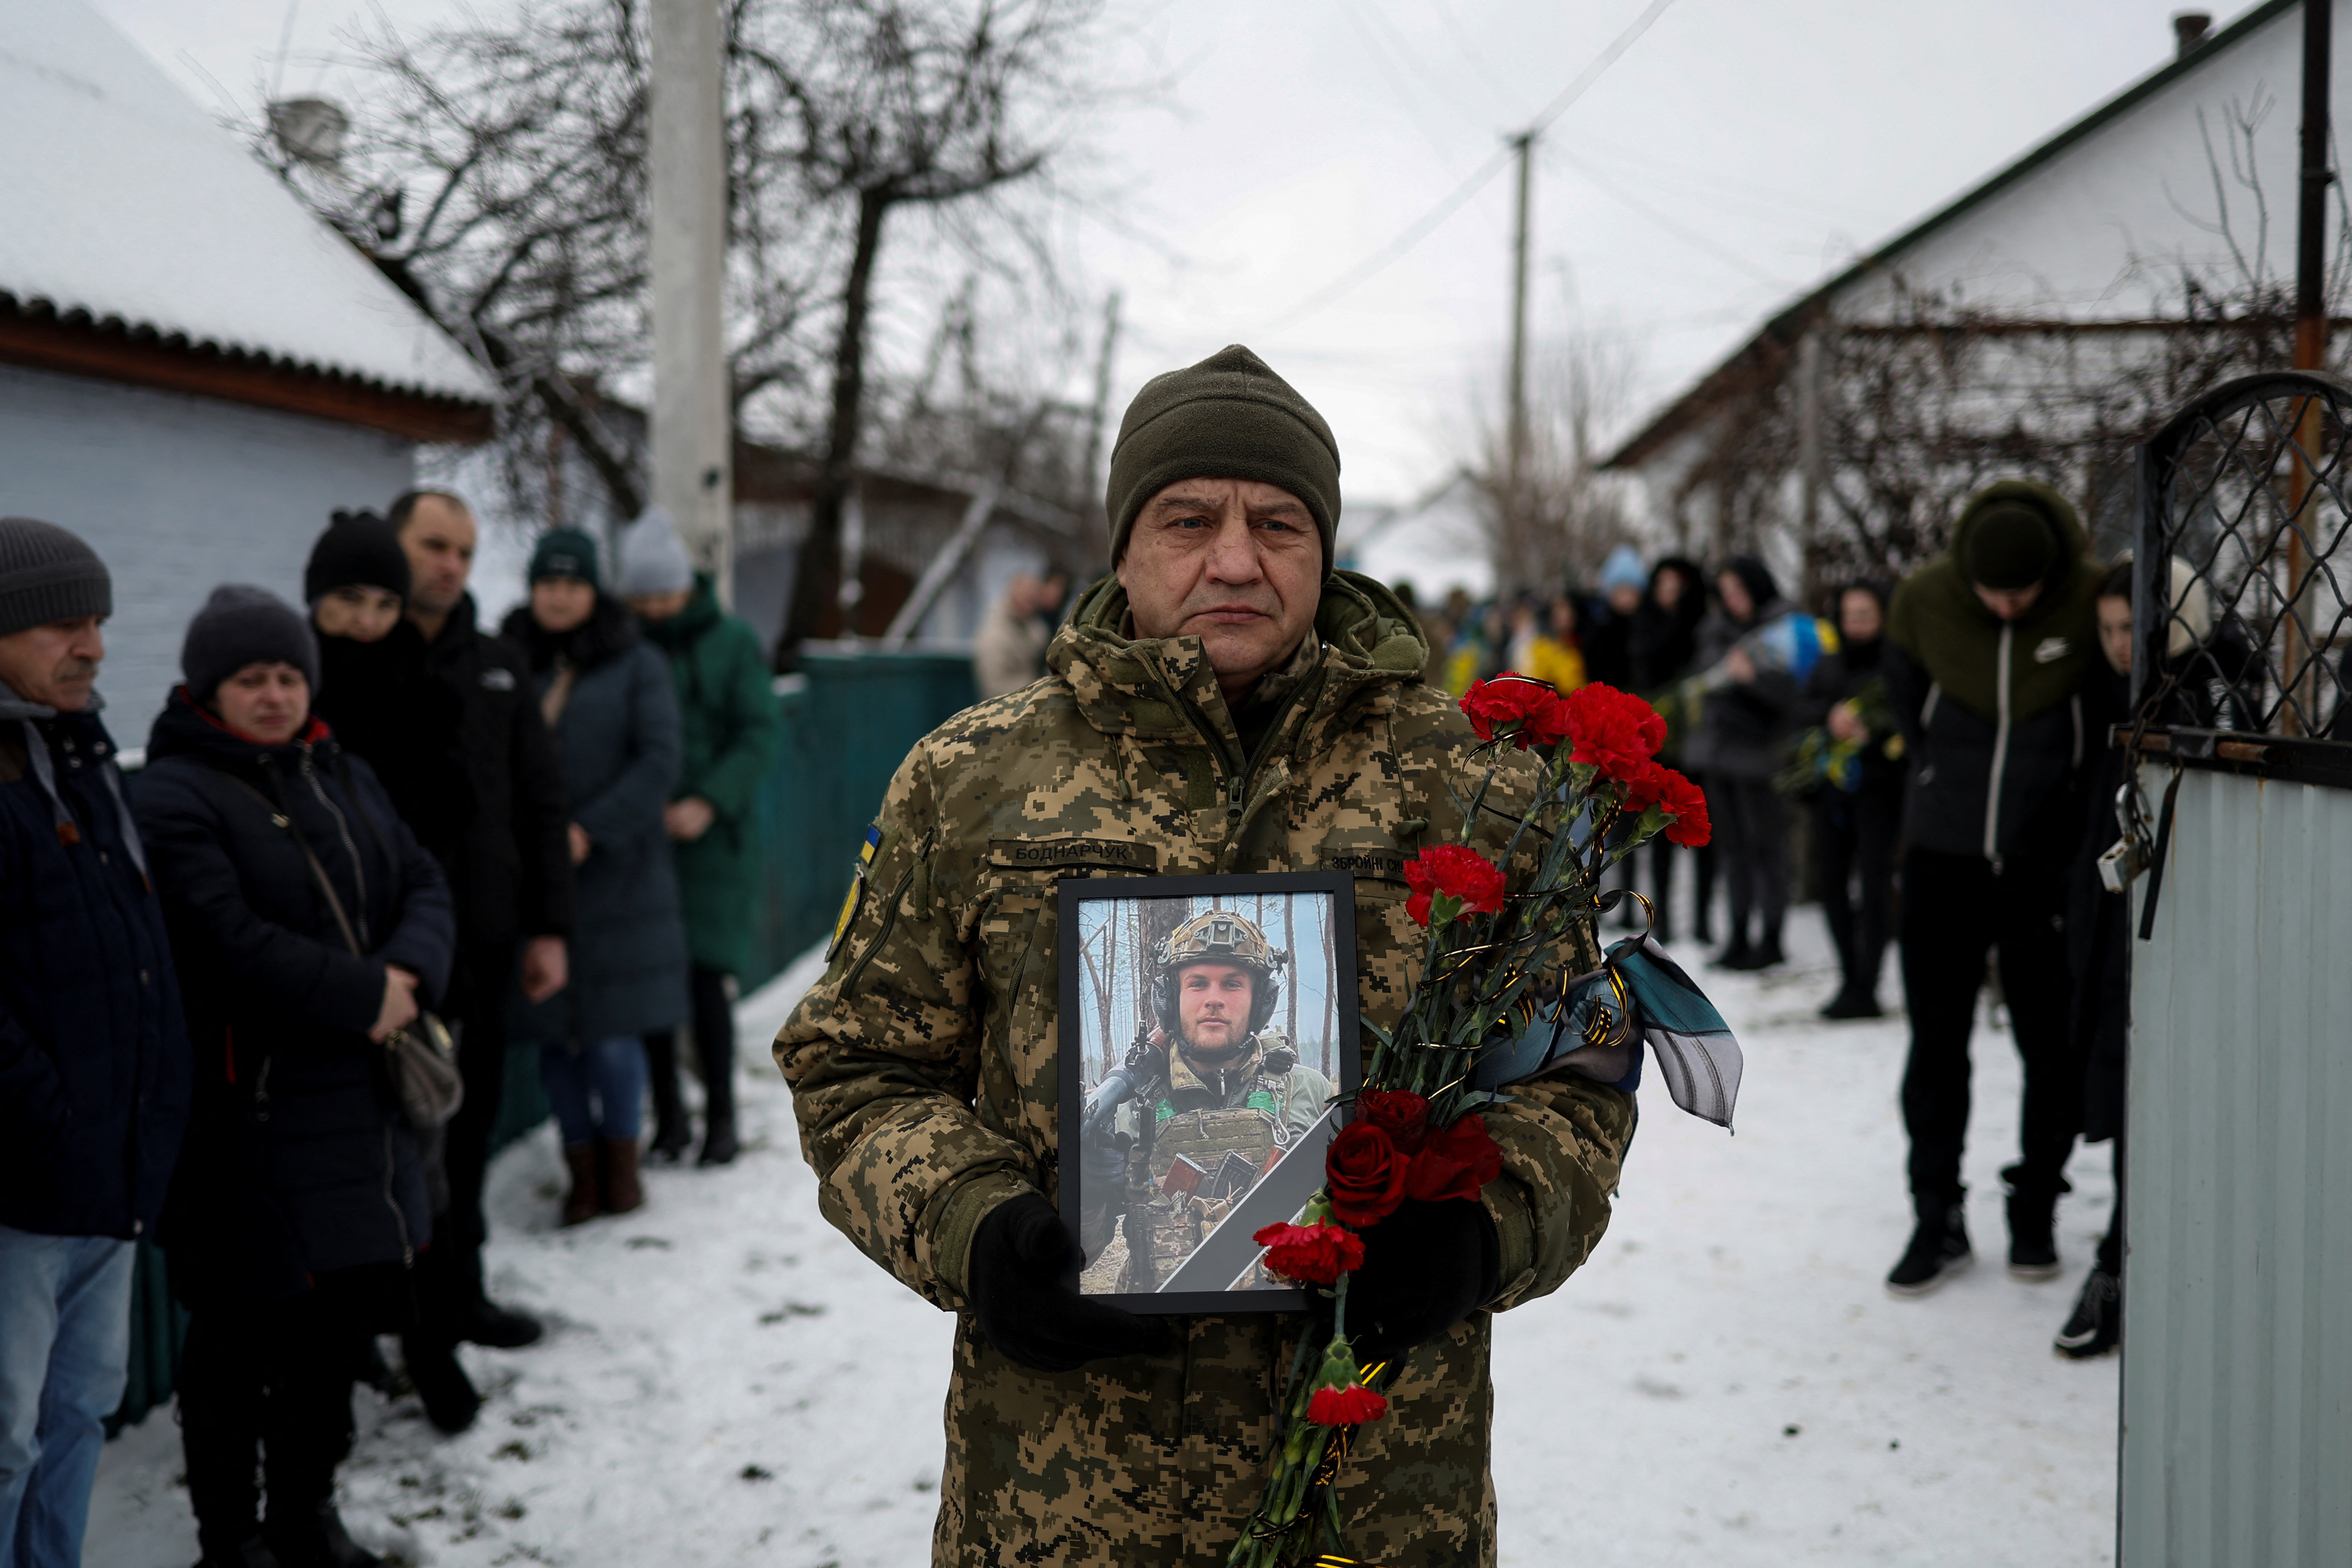 Funeral of Ukrainian decathlete and serviceman Volodymyr Androshchuk in Letychiv